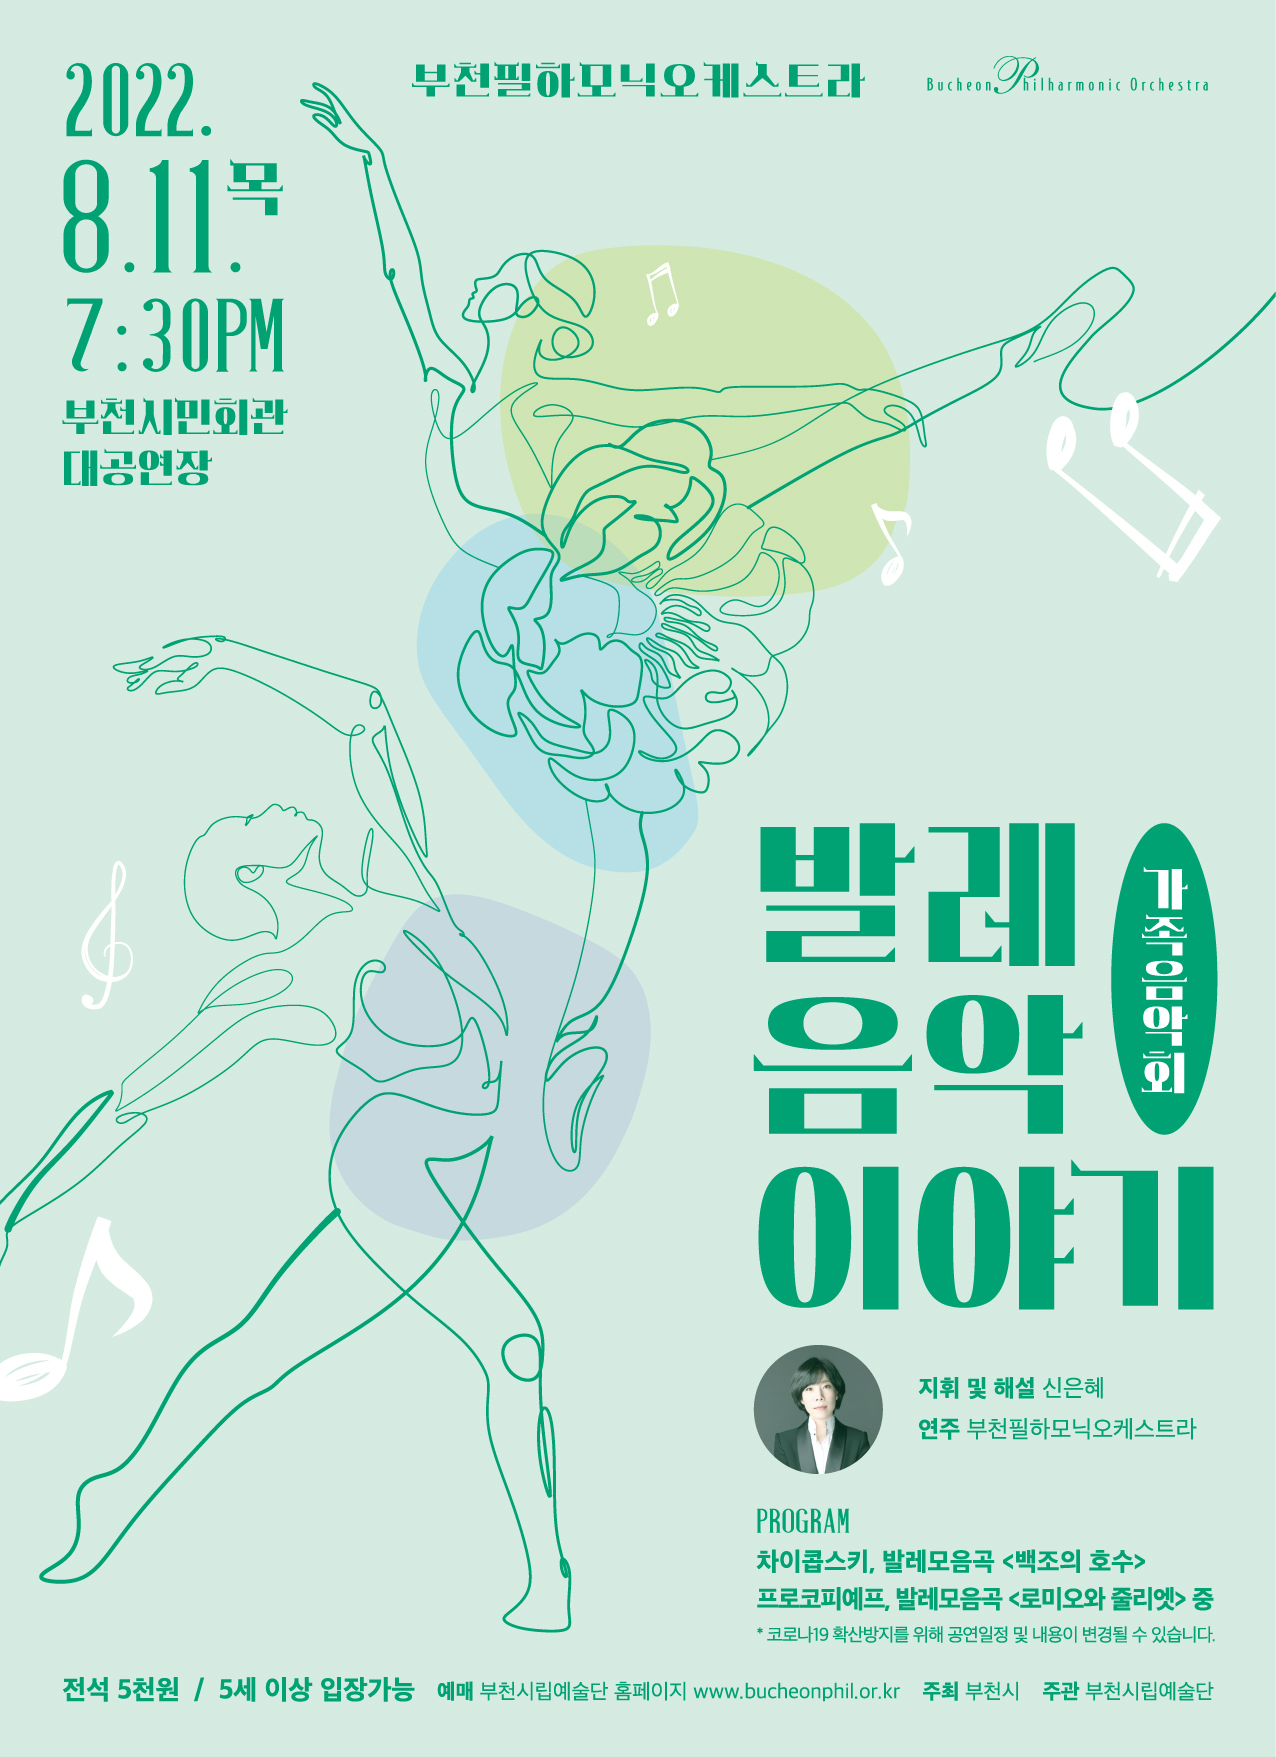 [8.11]Bucheon Philharmonic Orchestra Concert for Family